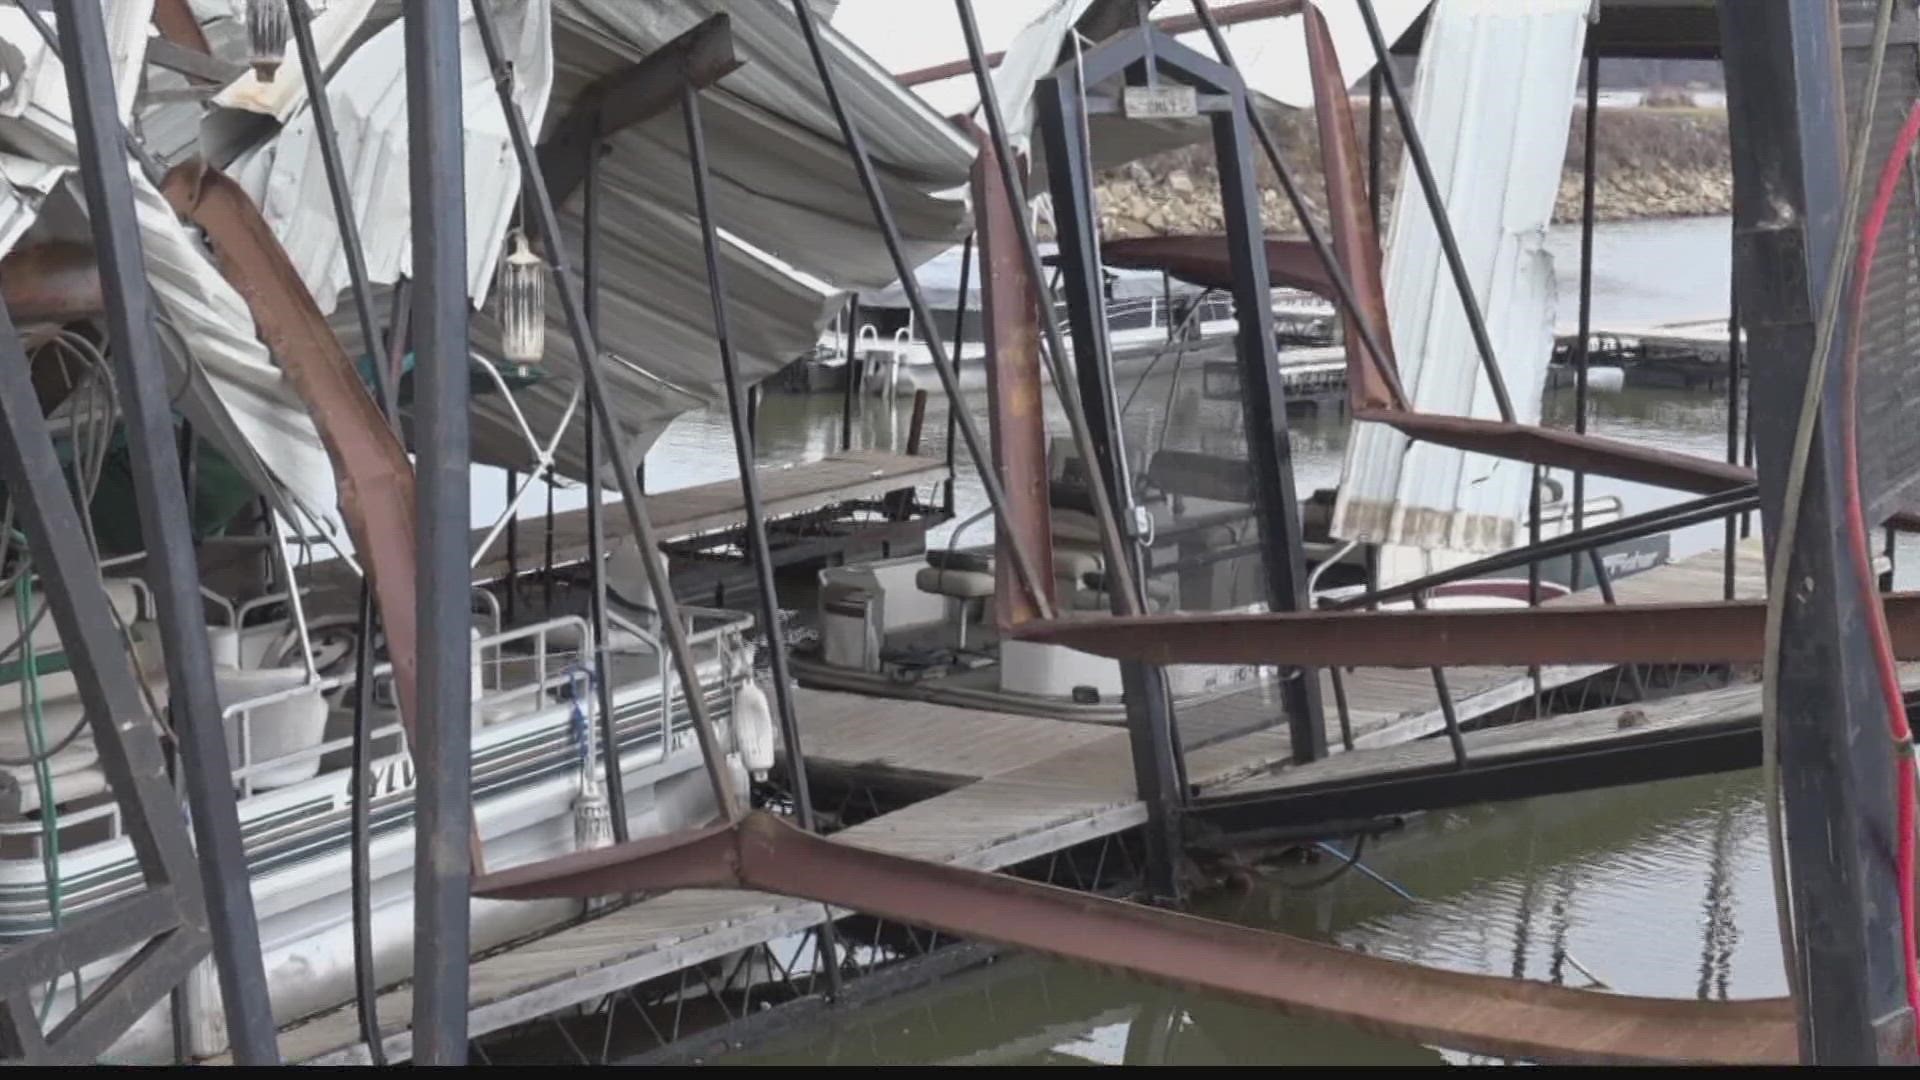 Jay Landing's Marina was hard-hit by Thursday's severe weather.